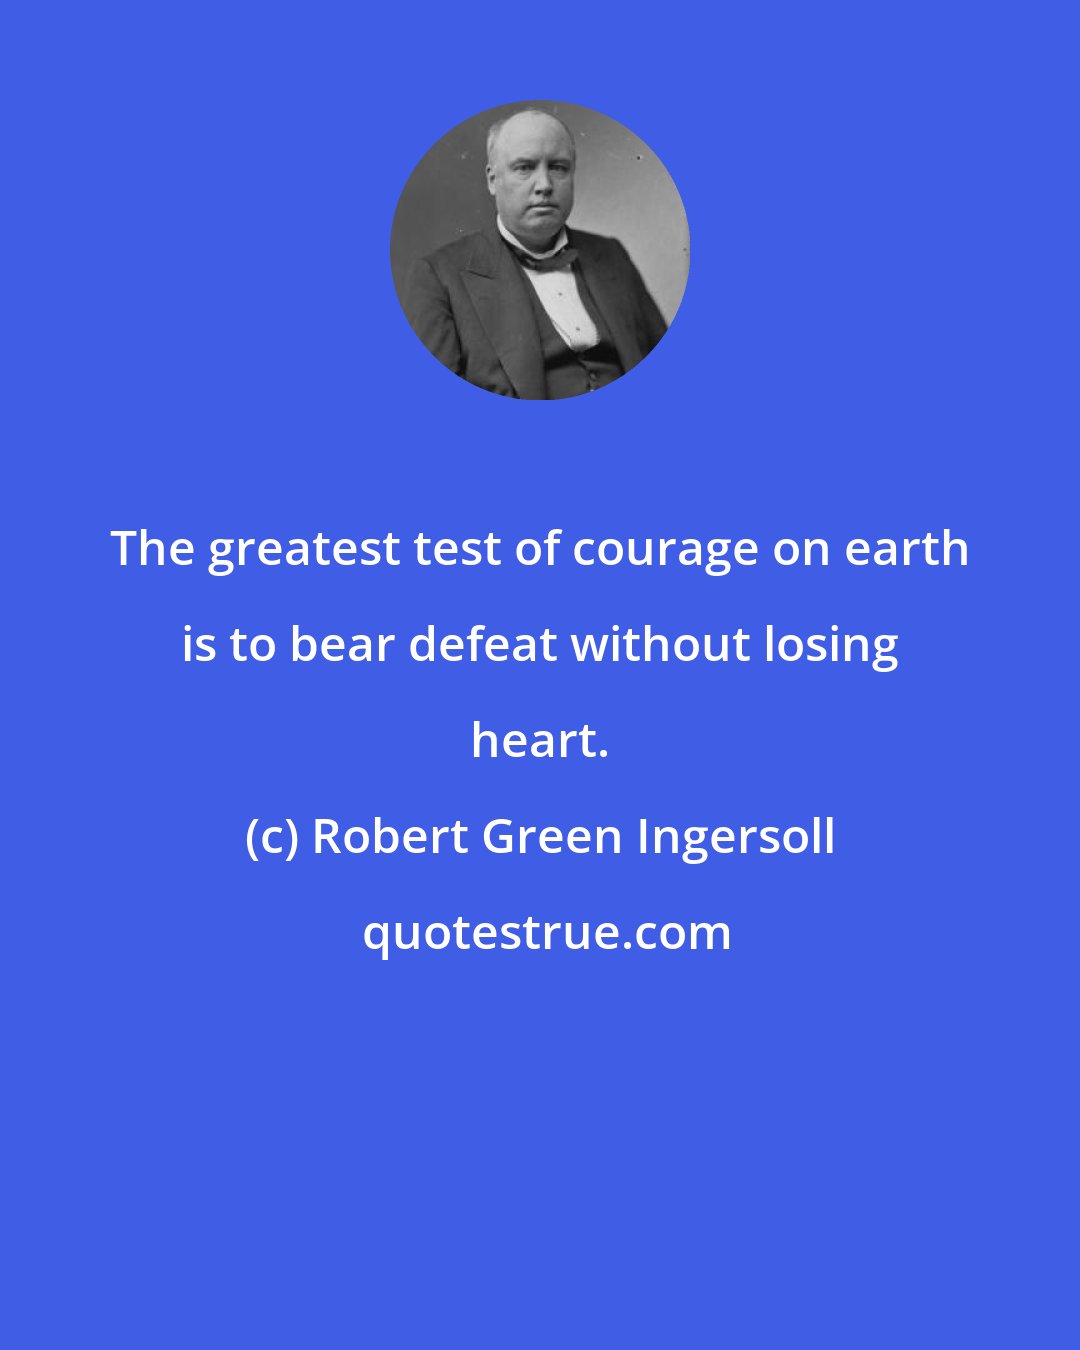 Robert Green Ingersoll: The greatest test of courage on earth is to bear defeat without losing heart.